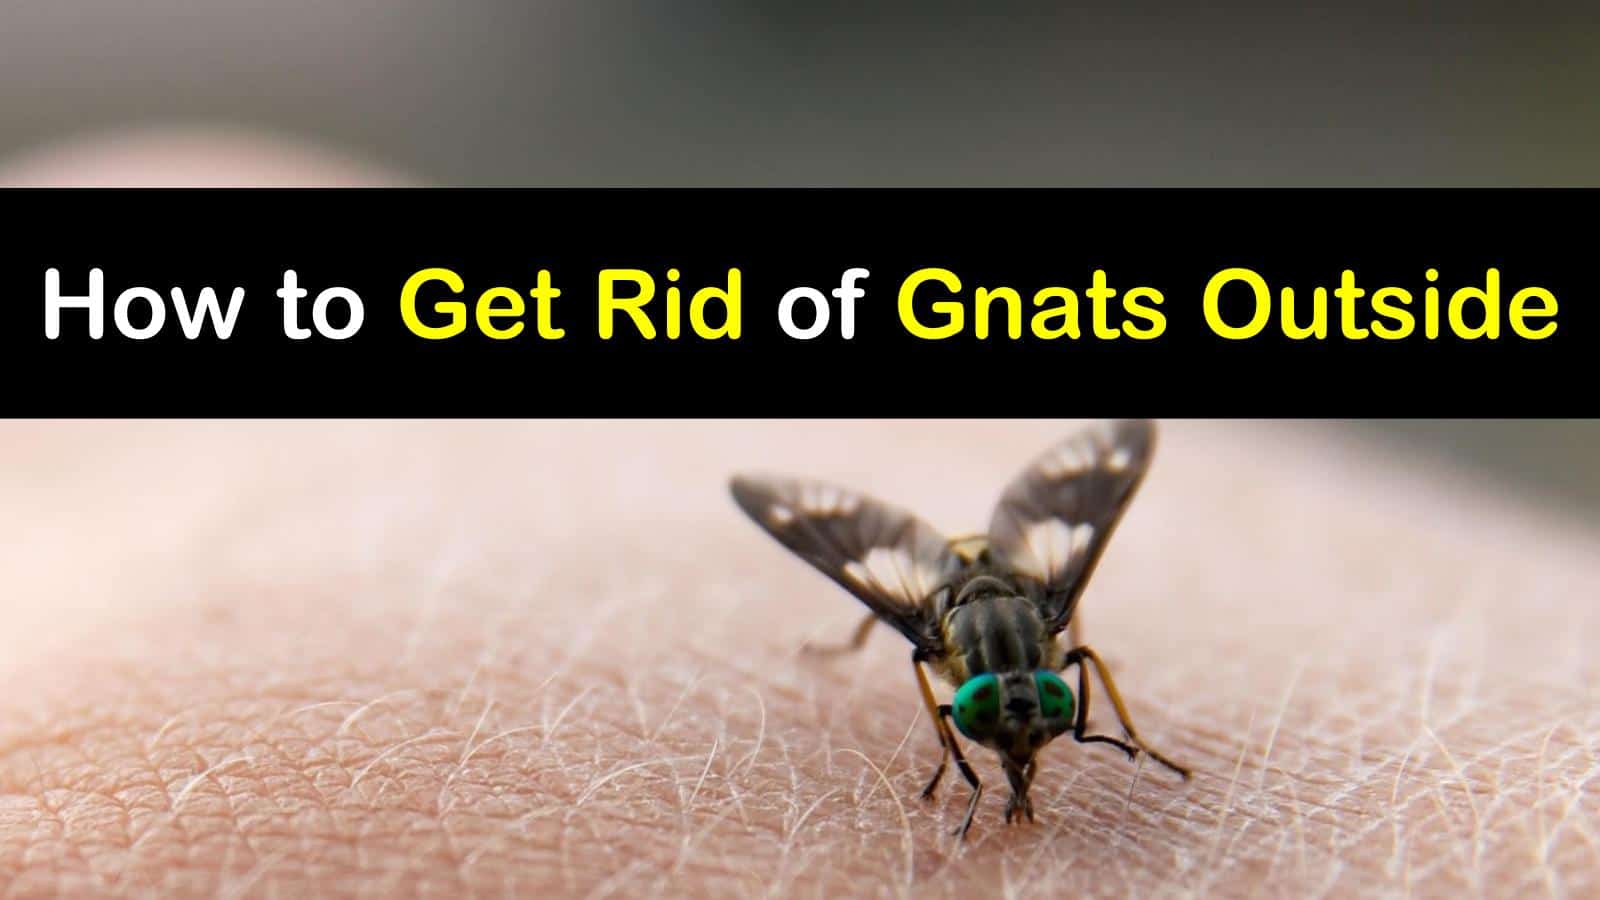 How to Get Rid of Gnats Outside